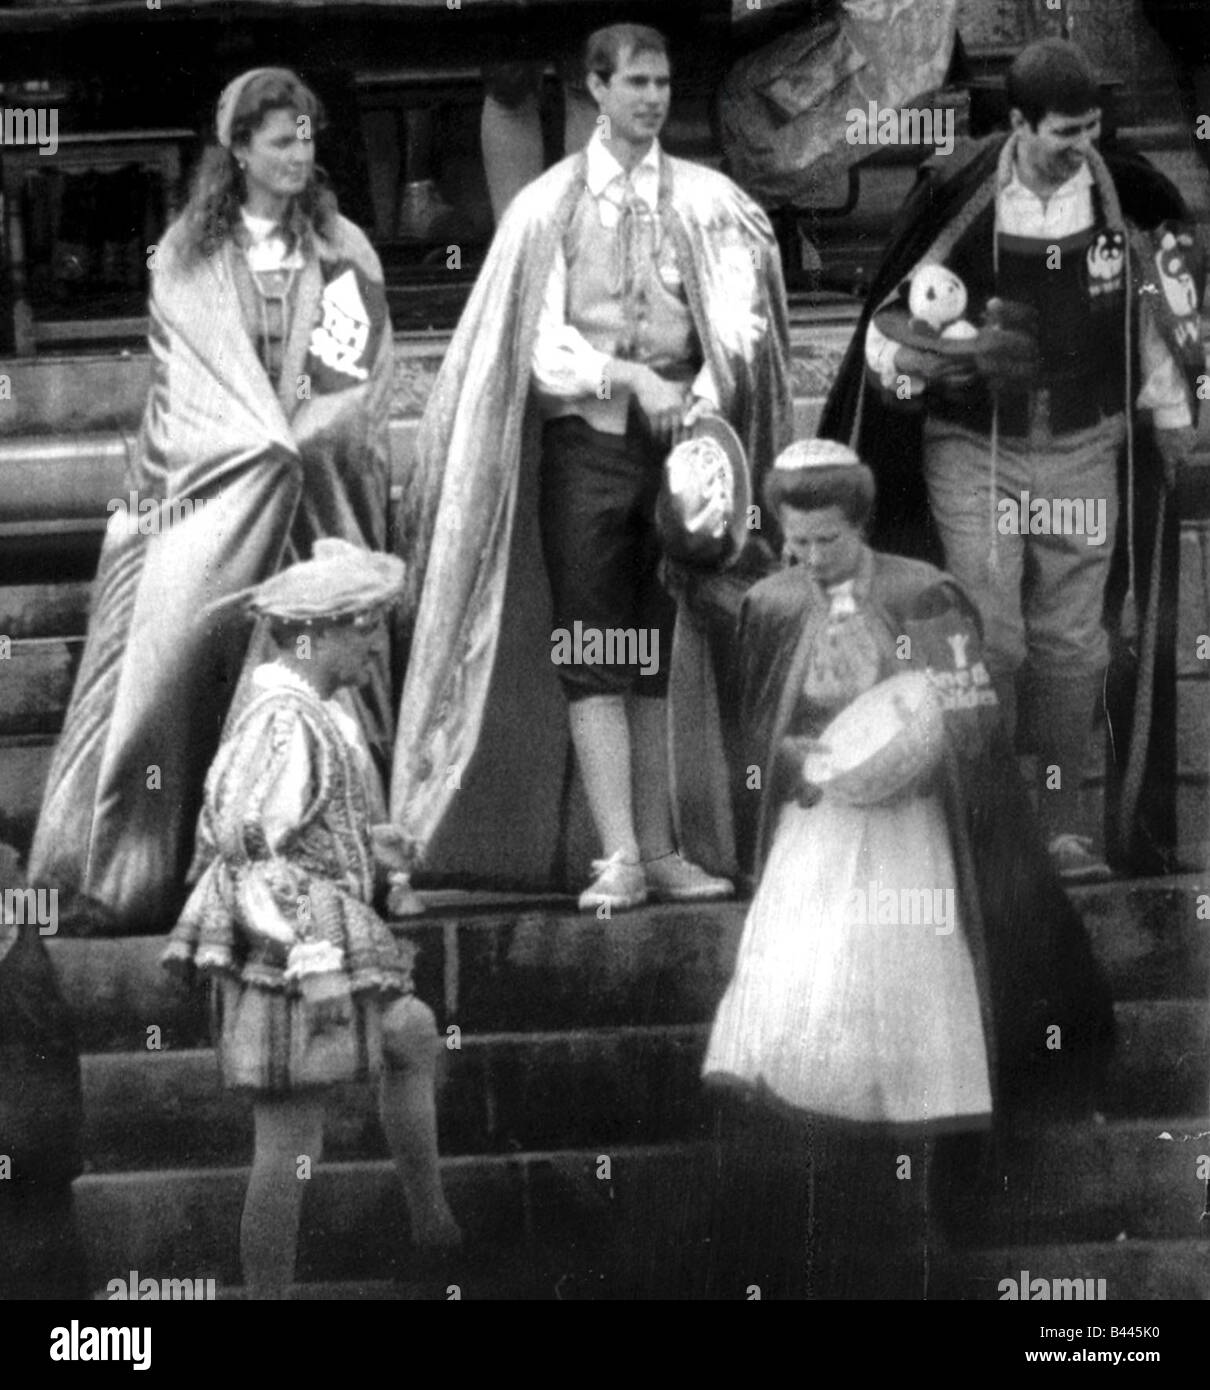 The Duchess of York Sarah Ferguson with Prince Edward Princess Anne and Prince Andrew The Duke of York in medieval costume Stock Photo